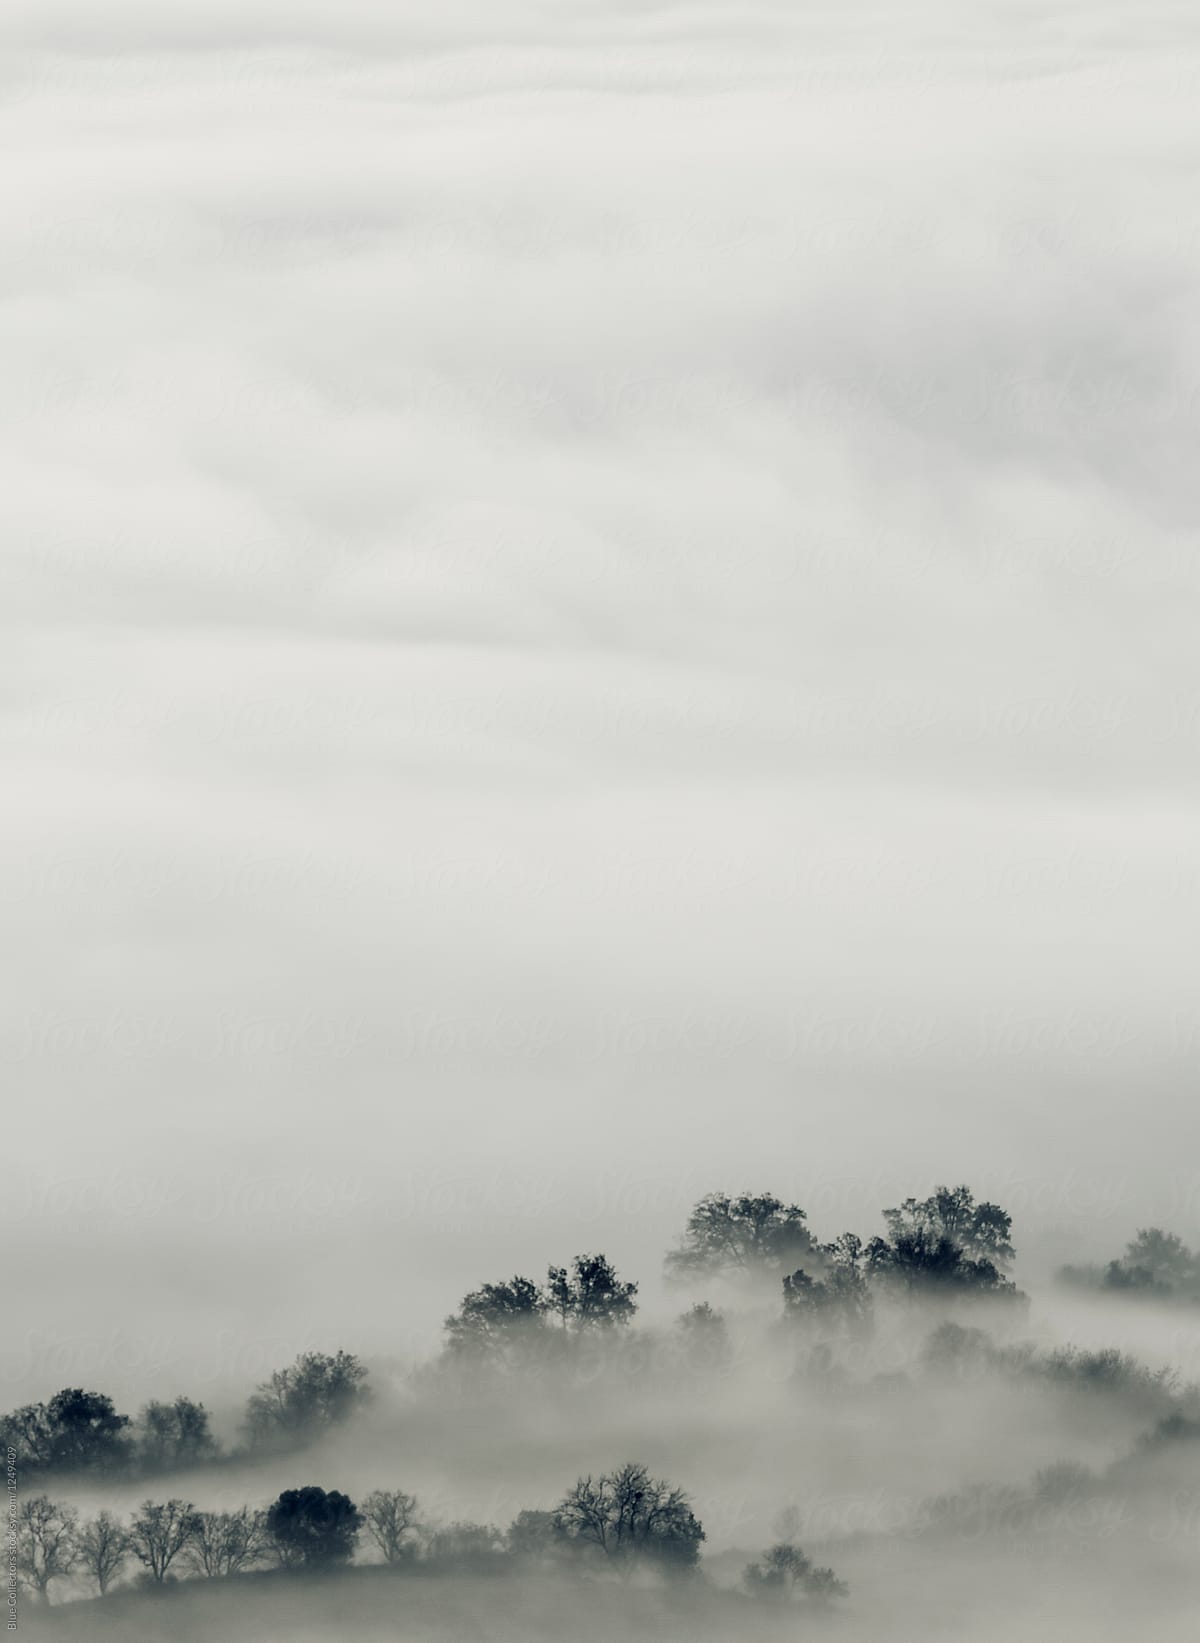 Landscapes of trees and mountains In The Morning Mist